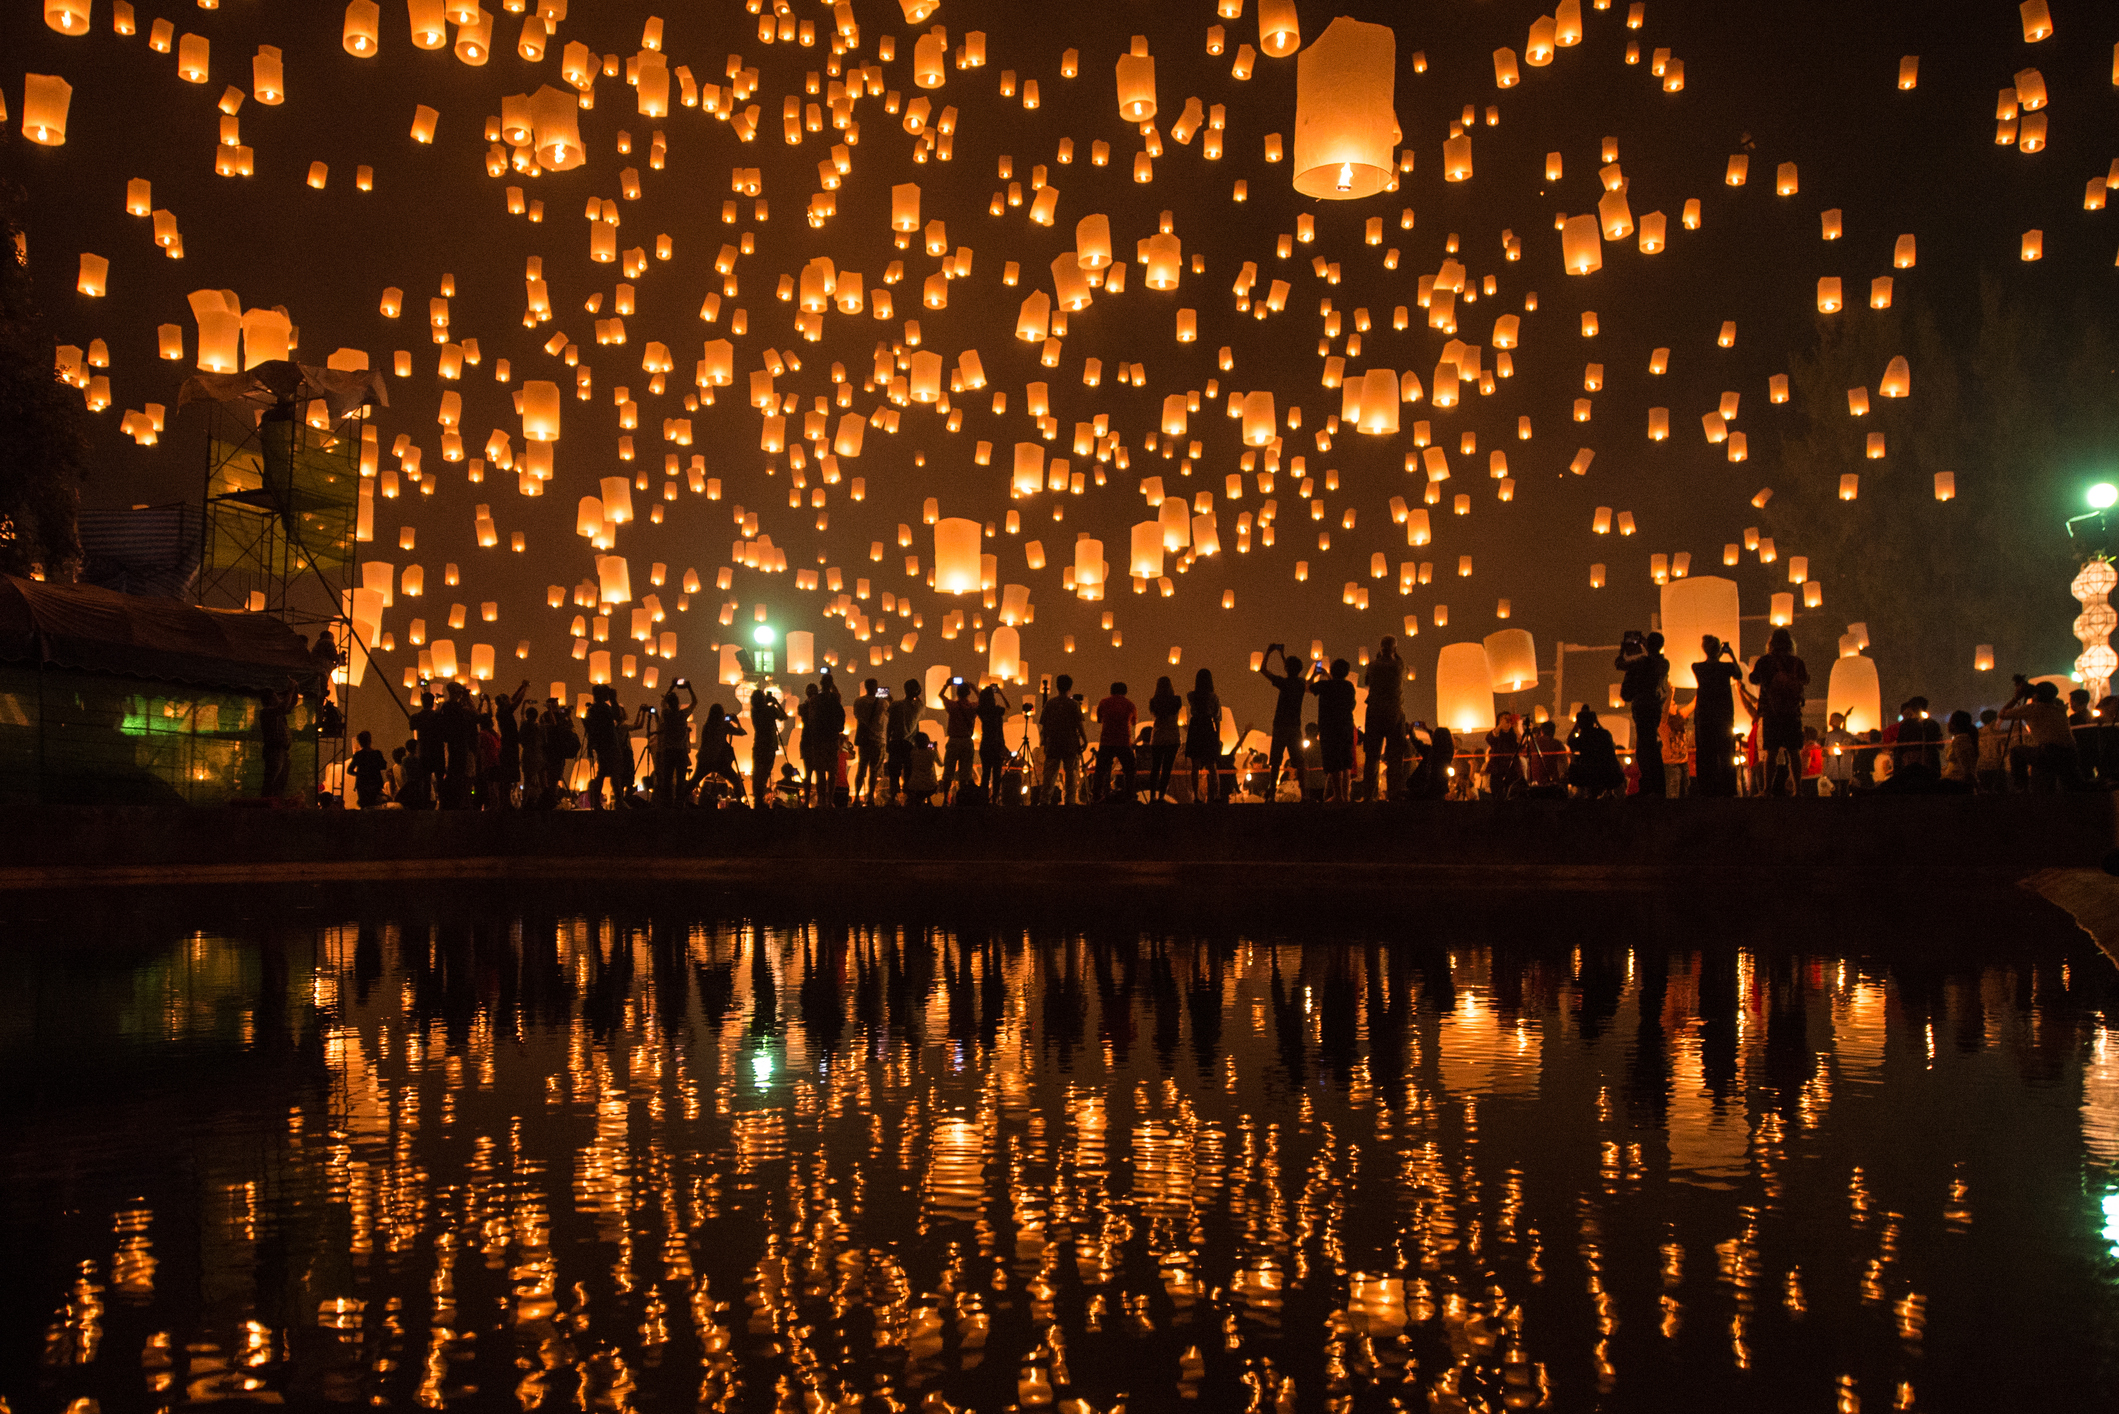 Thousands of Lanterns in the sky with the reflection on the water with people watching.Yeepeng festival, Chiangmai, Thailand